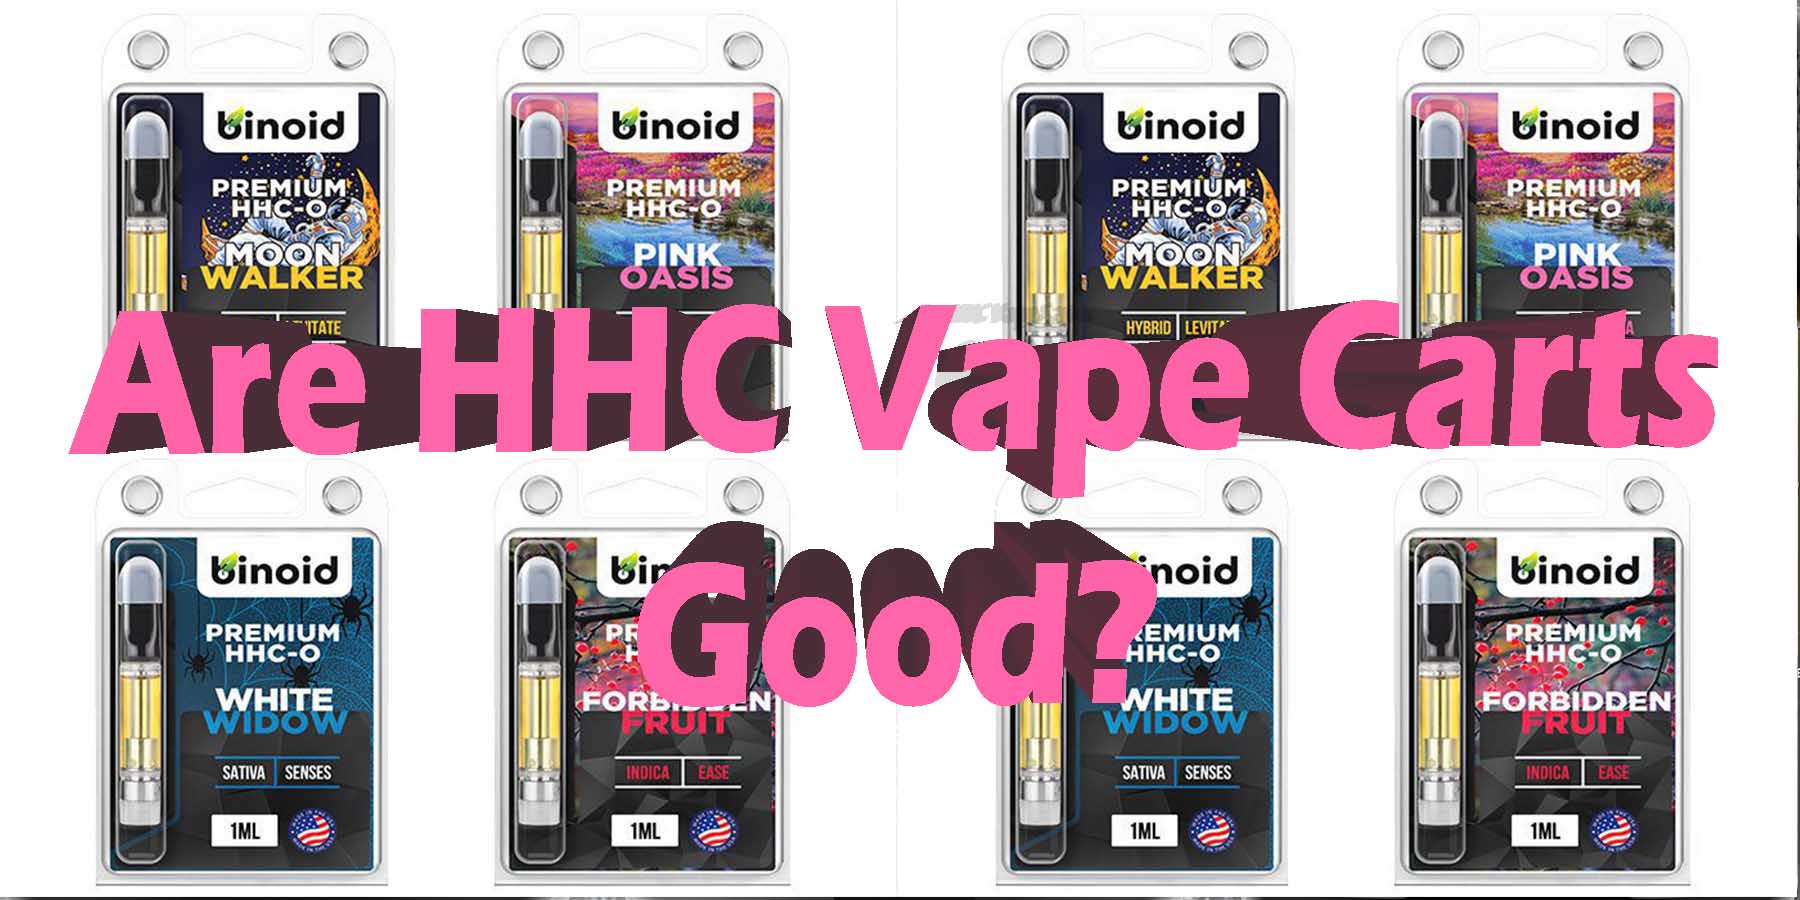 Are HHC Vape Carts Good WhereToGet HowToGetNearMe BestPlace LowestPrice Coupon Discount For Smoking-Best-High-Smoke Shop Online-Near Me StrongestBrand BestBrand Binoid